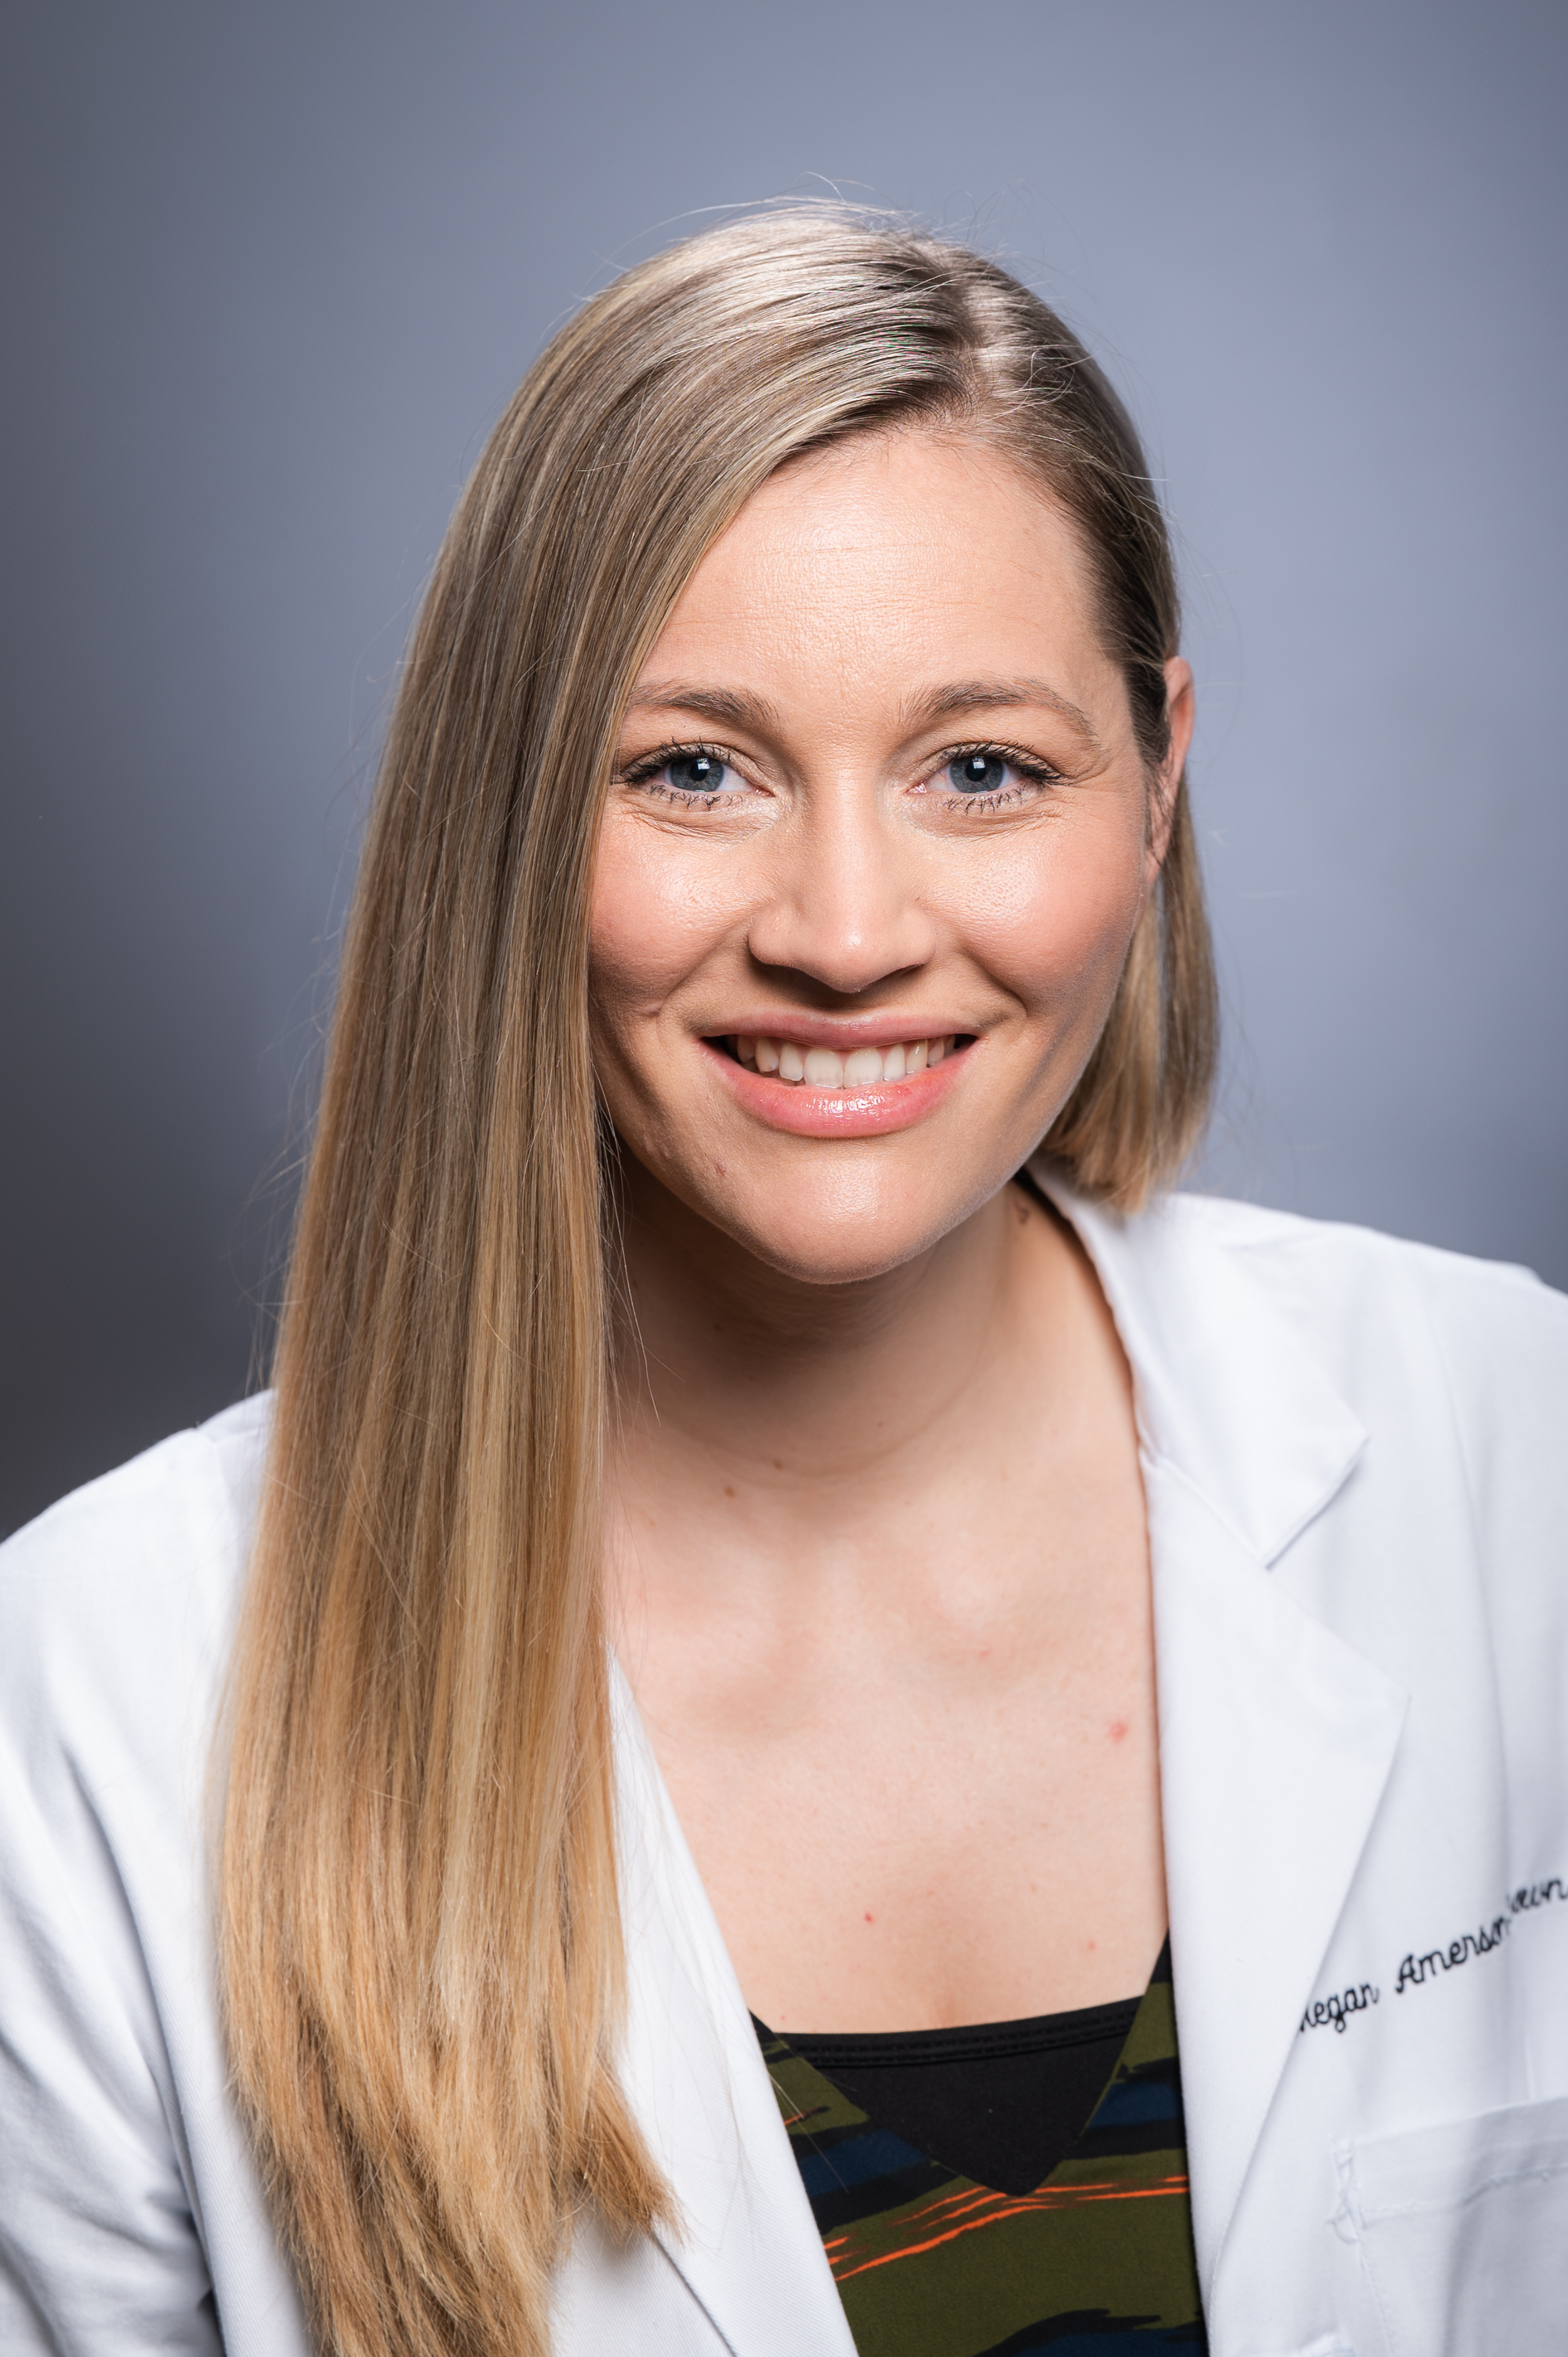 Headshot of Dr. Megan Amerson-Brown, PhD (Assistant Professor, Laboratory Medicine) in white medical coat, August 2022.